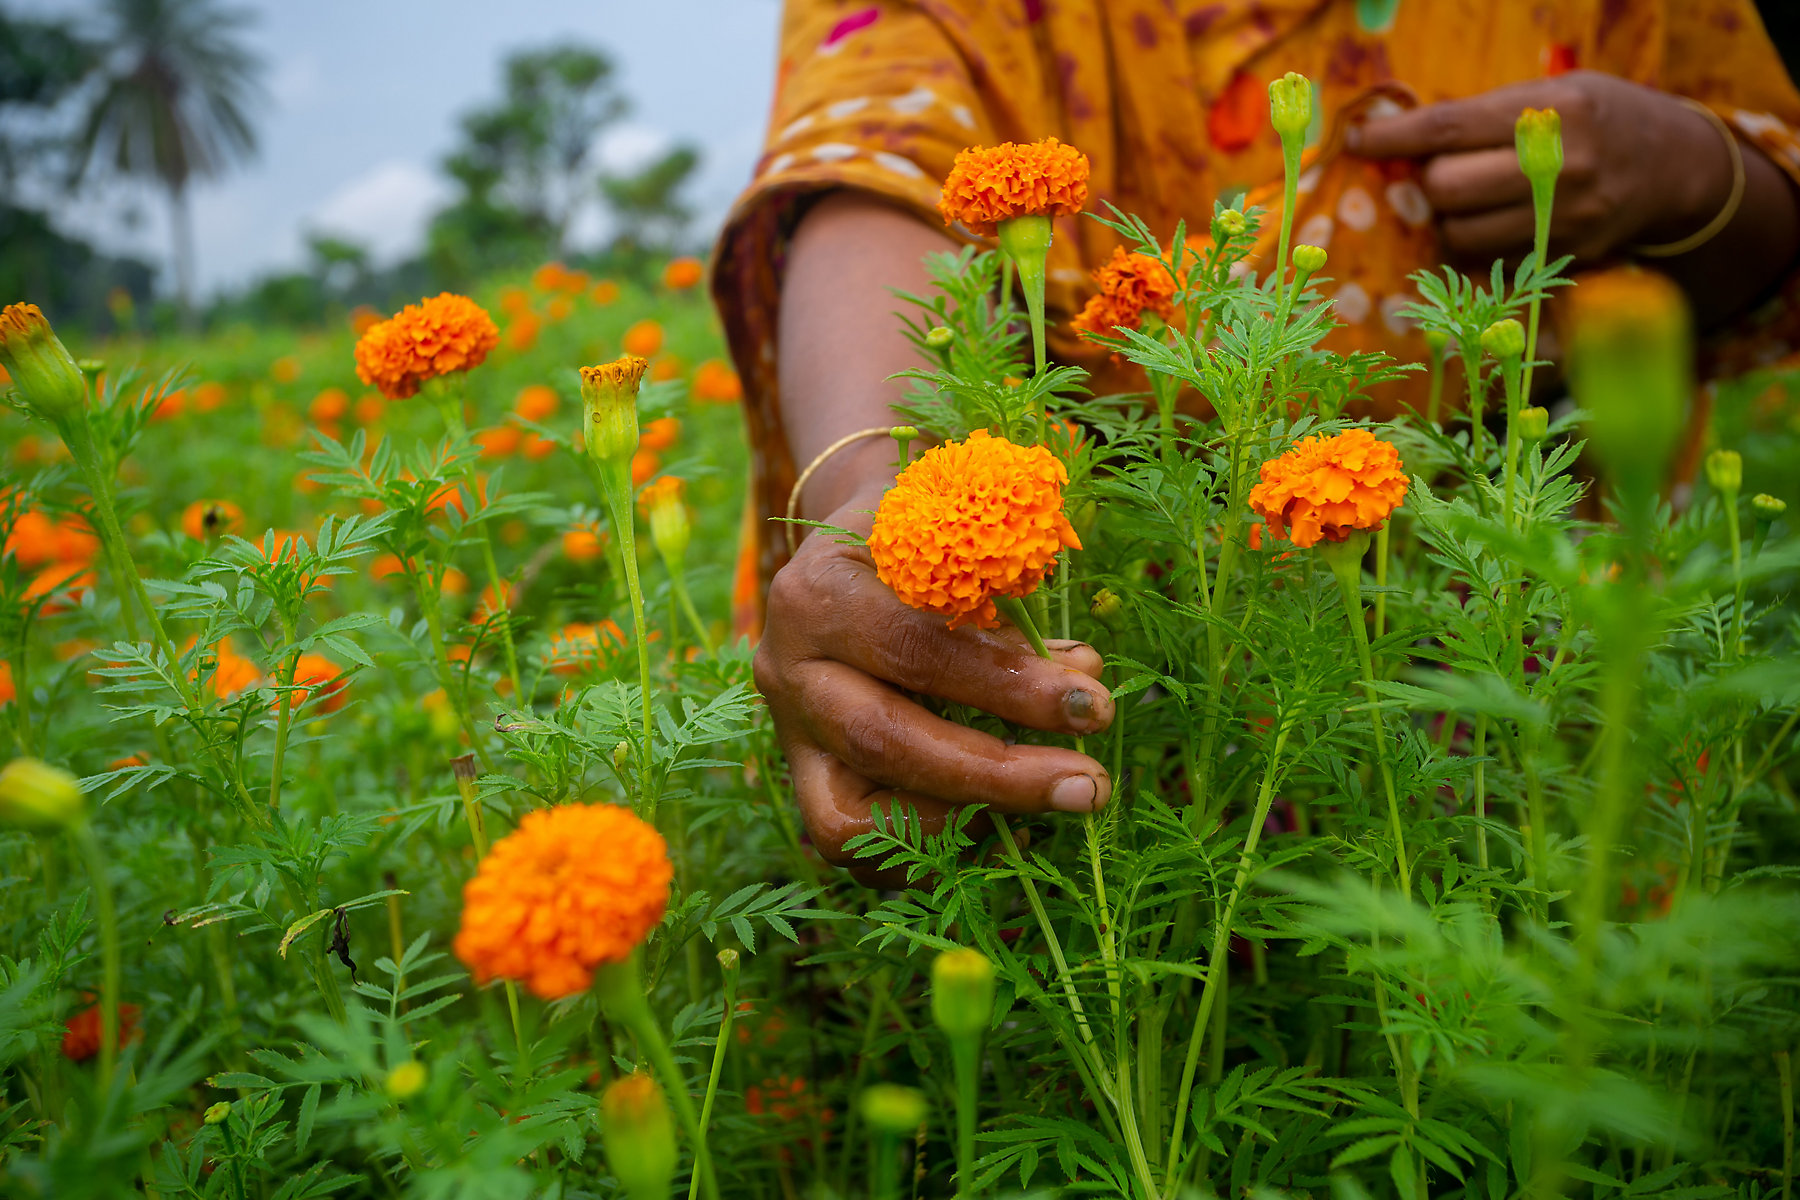 A flower farmer woman picking marigold flowers using by hand. Collecting marigold flowers.